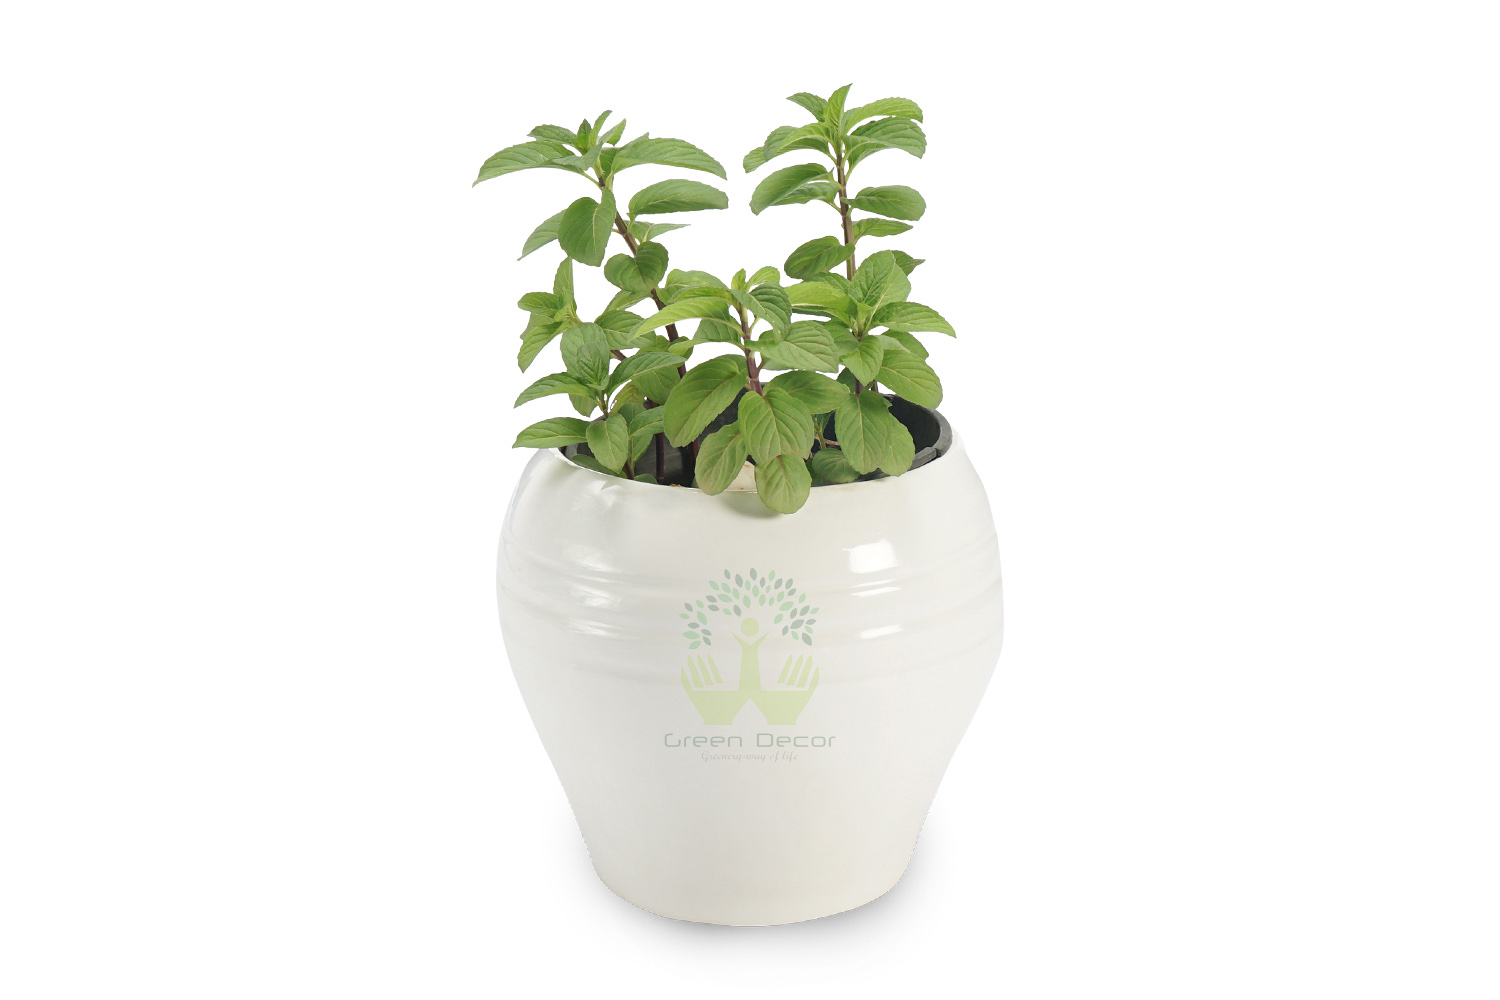 Buy Lemon Balm Plants , White Pots and seeds in Delhi NCR by the best online nursery shop Greendecor.